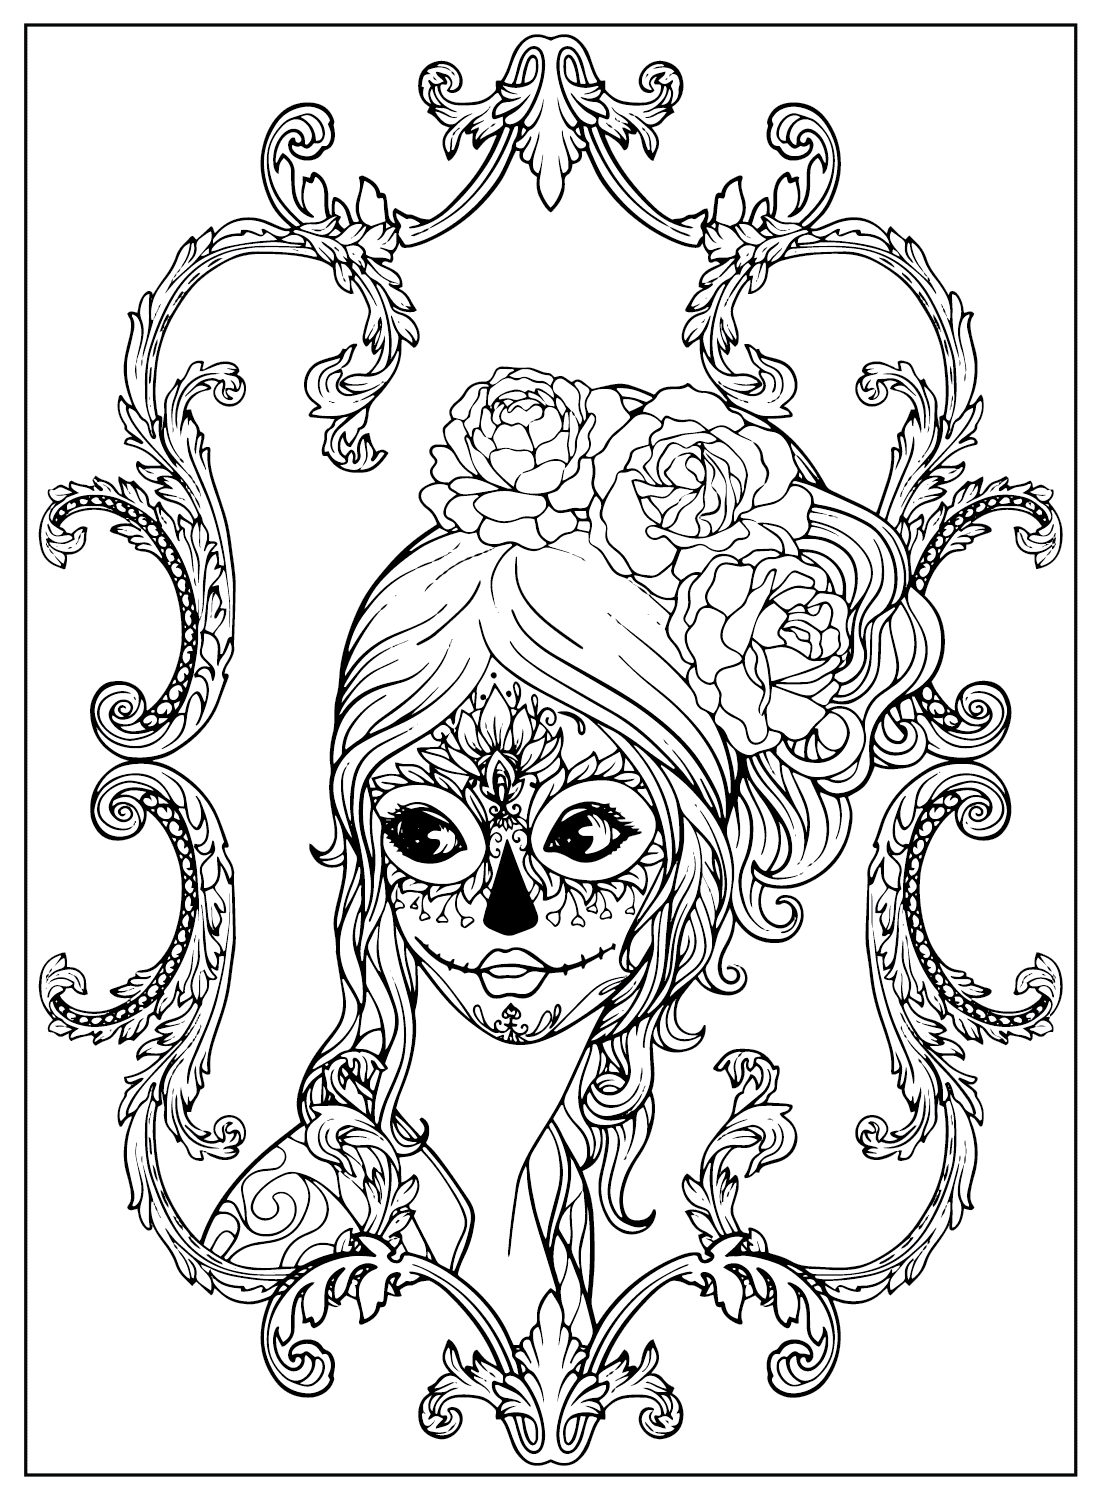 Day of The Dead Coloring Sheet